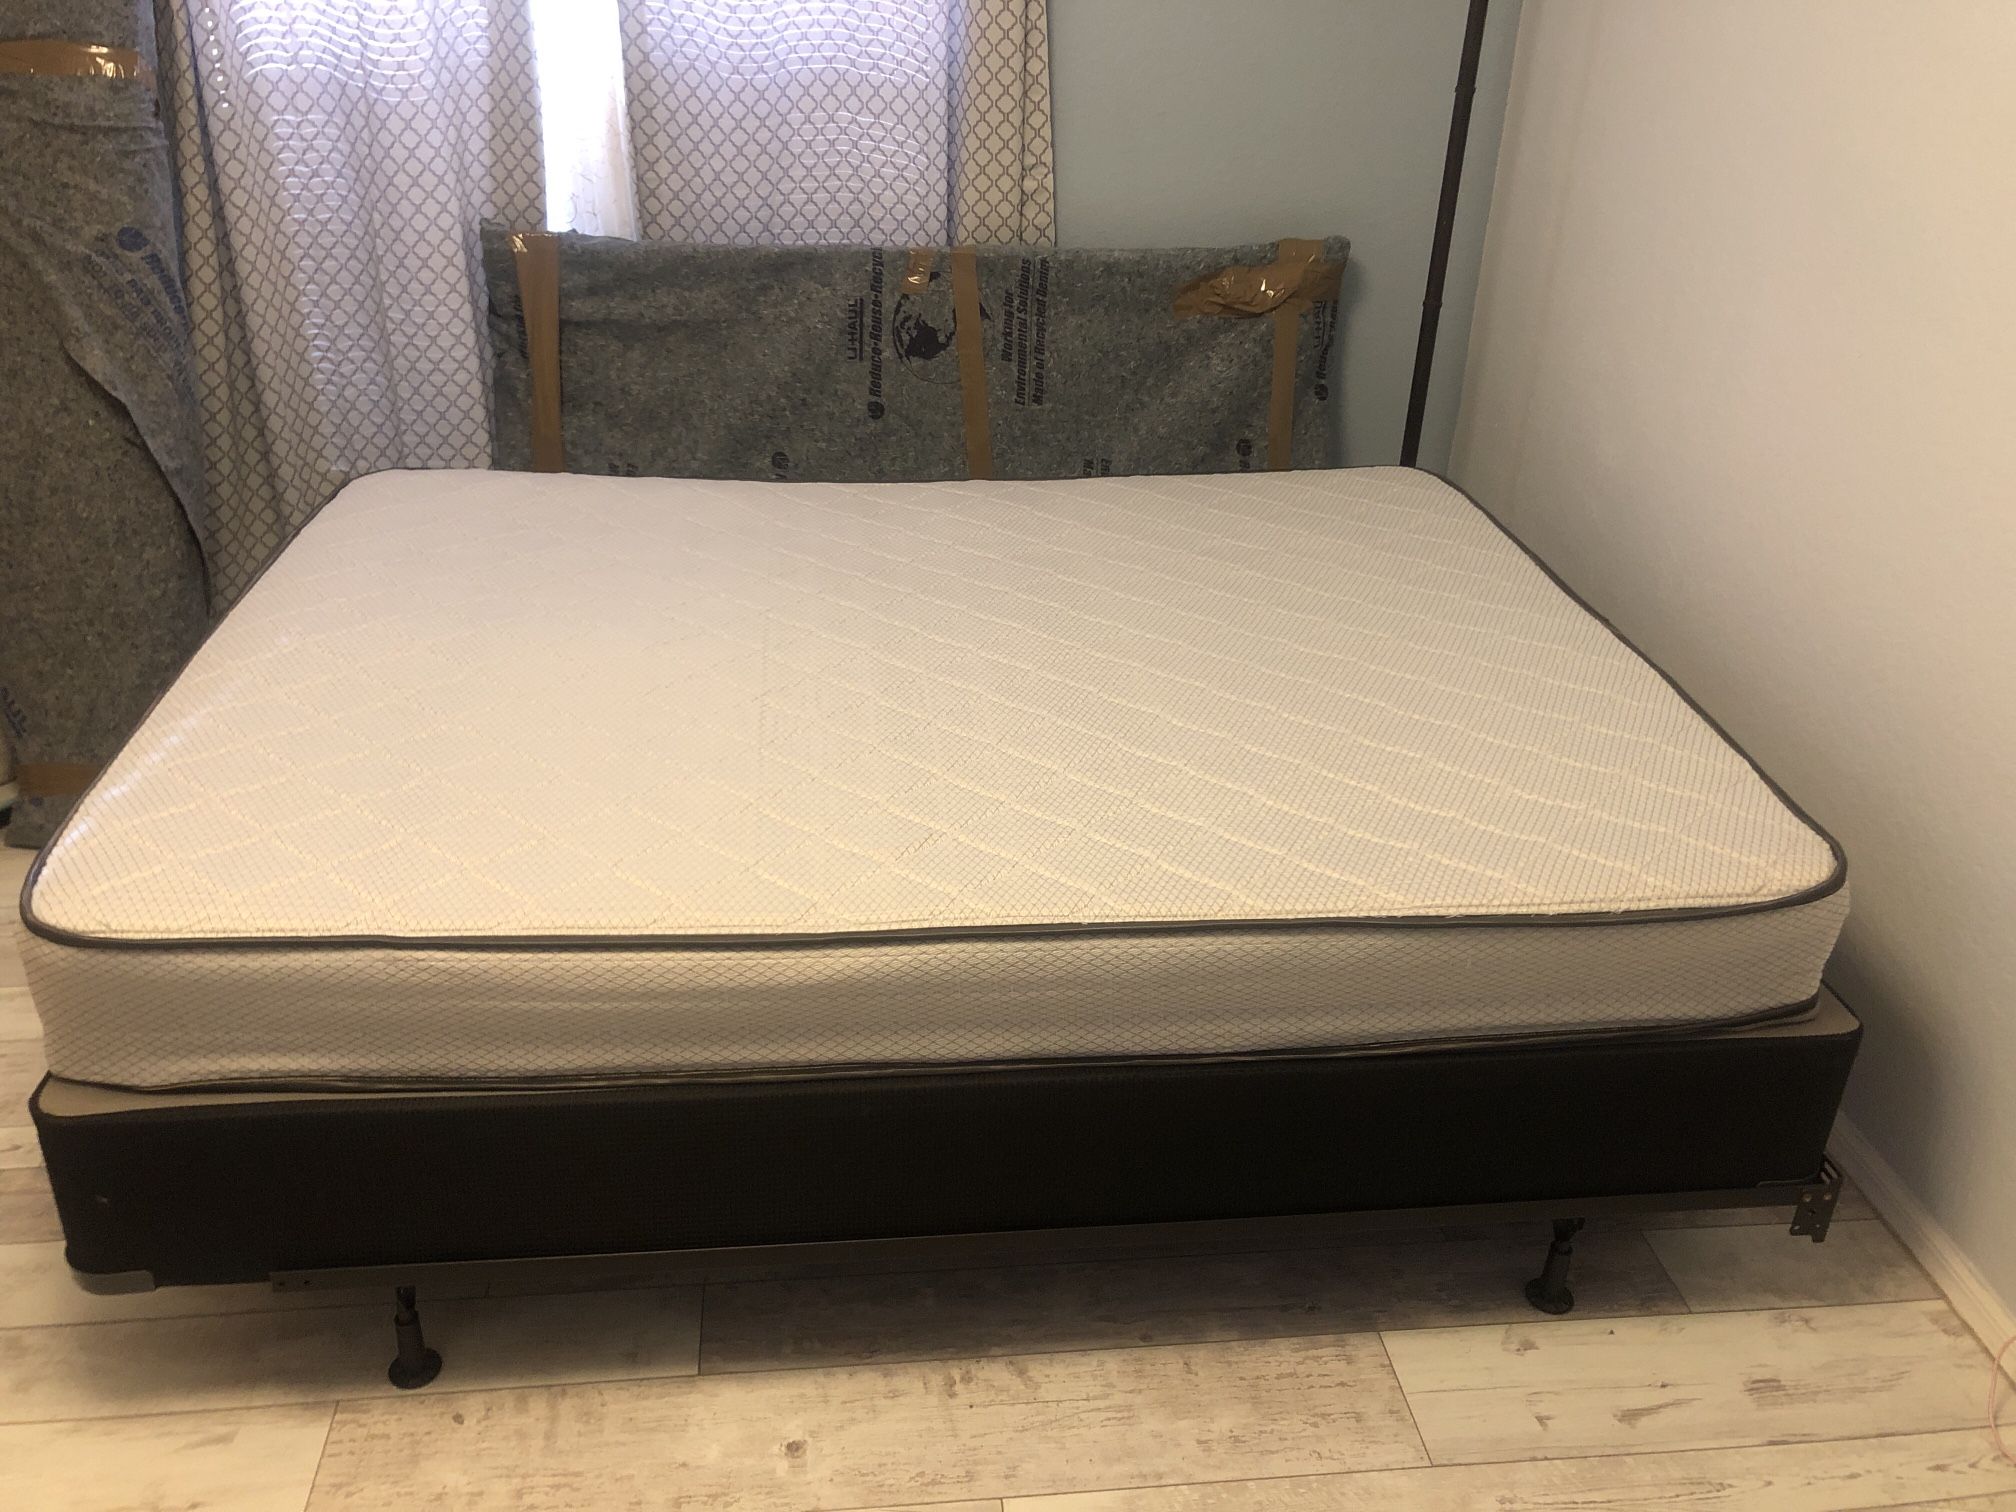 Queen Size Mattress with Spring Box and Frame